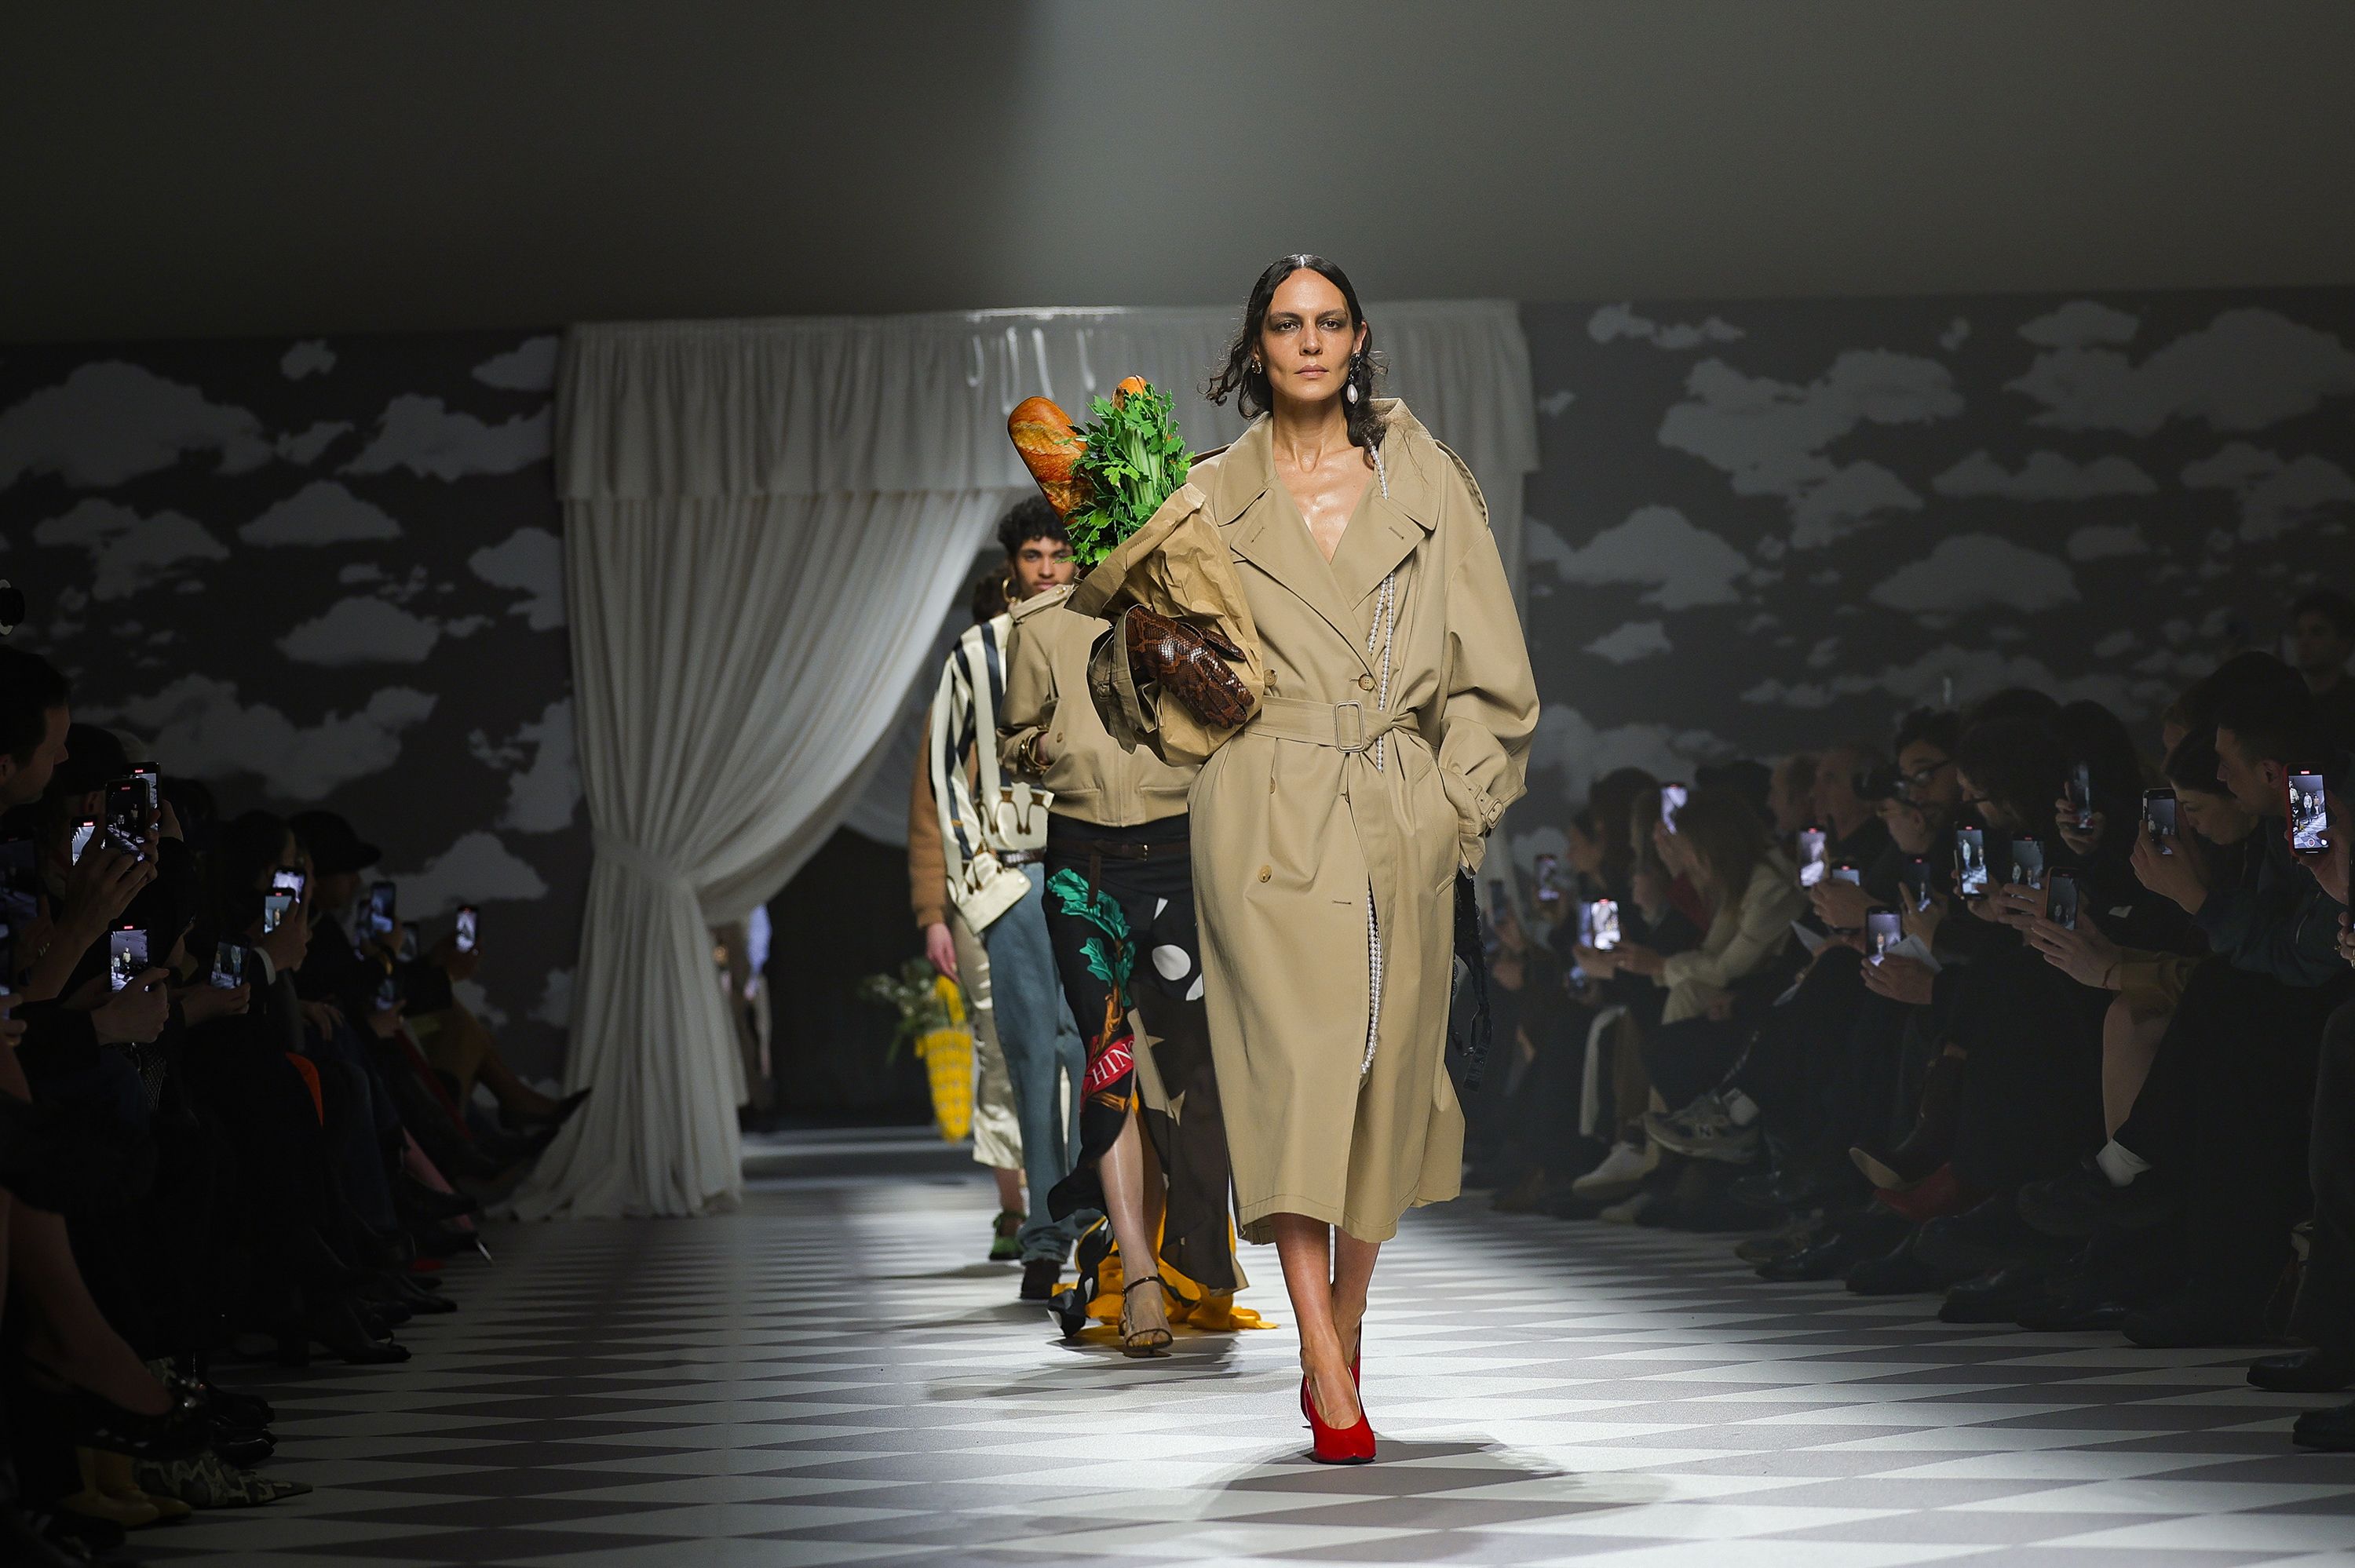 Appiolaza said his aim was to bring Franco Moschino's masterpieces "back to life."